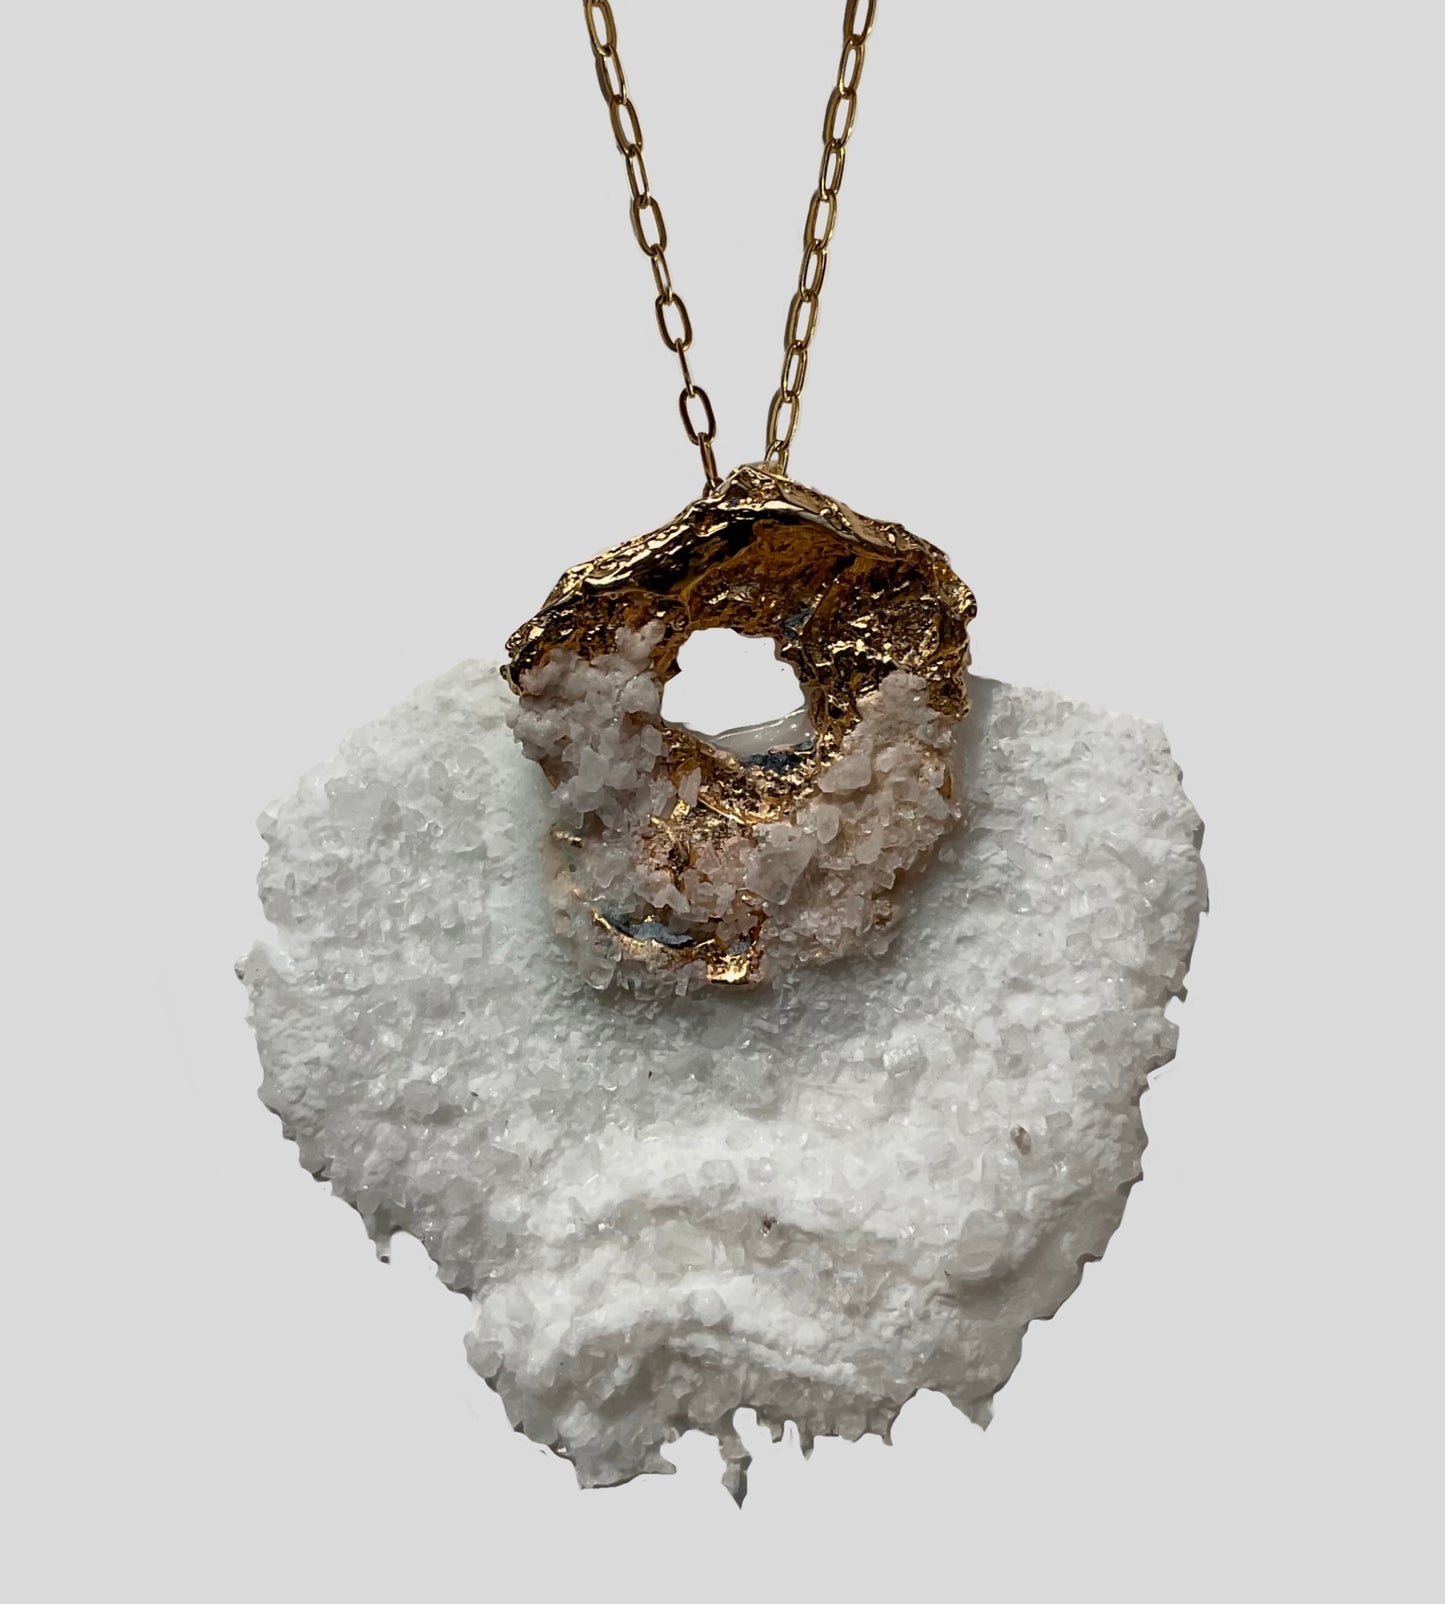 SALT small pendant in gold tone with salty art